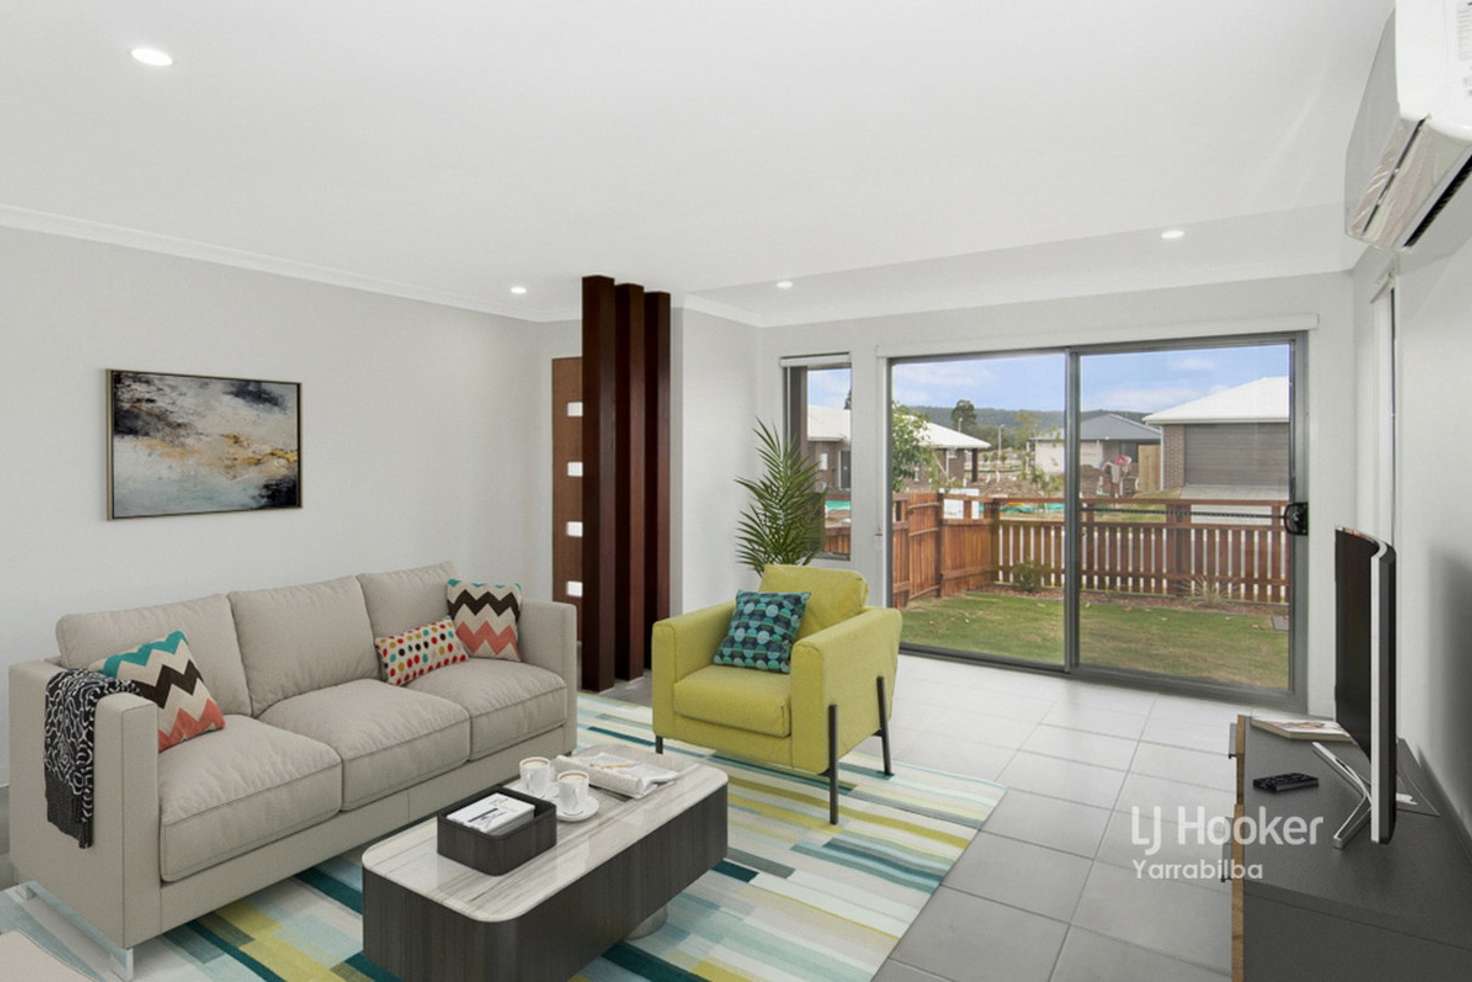 Main view of Homely house listing, 22 Strata Circuit, Yarrabilba QLD 4207